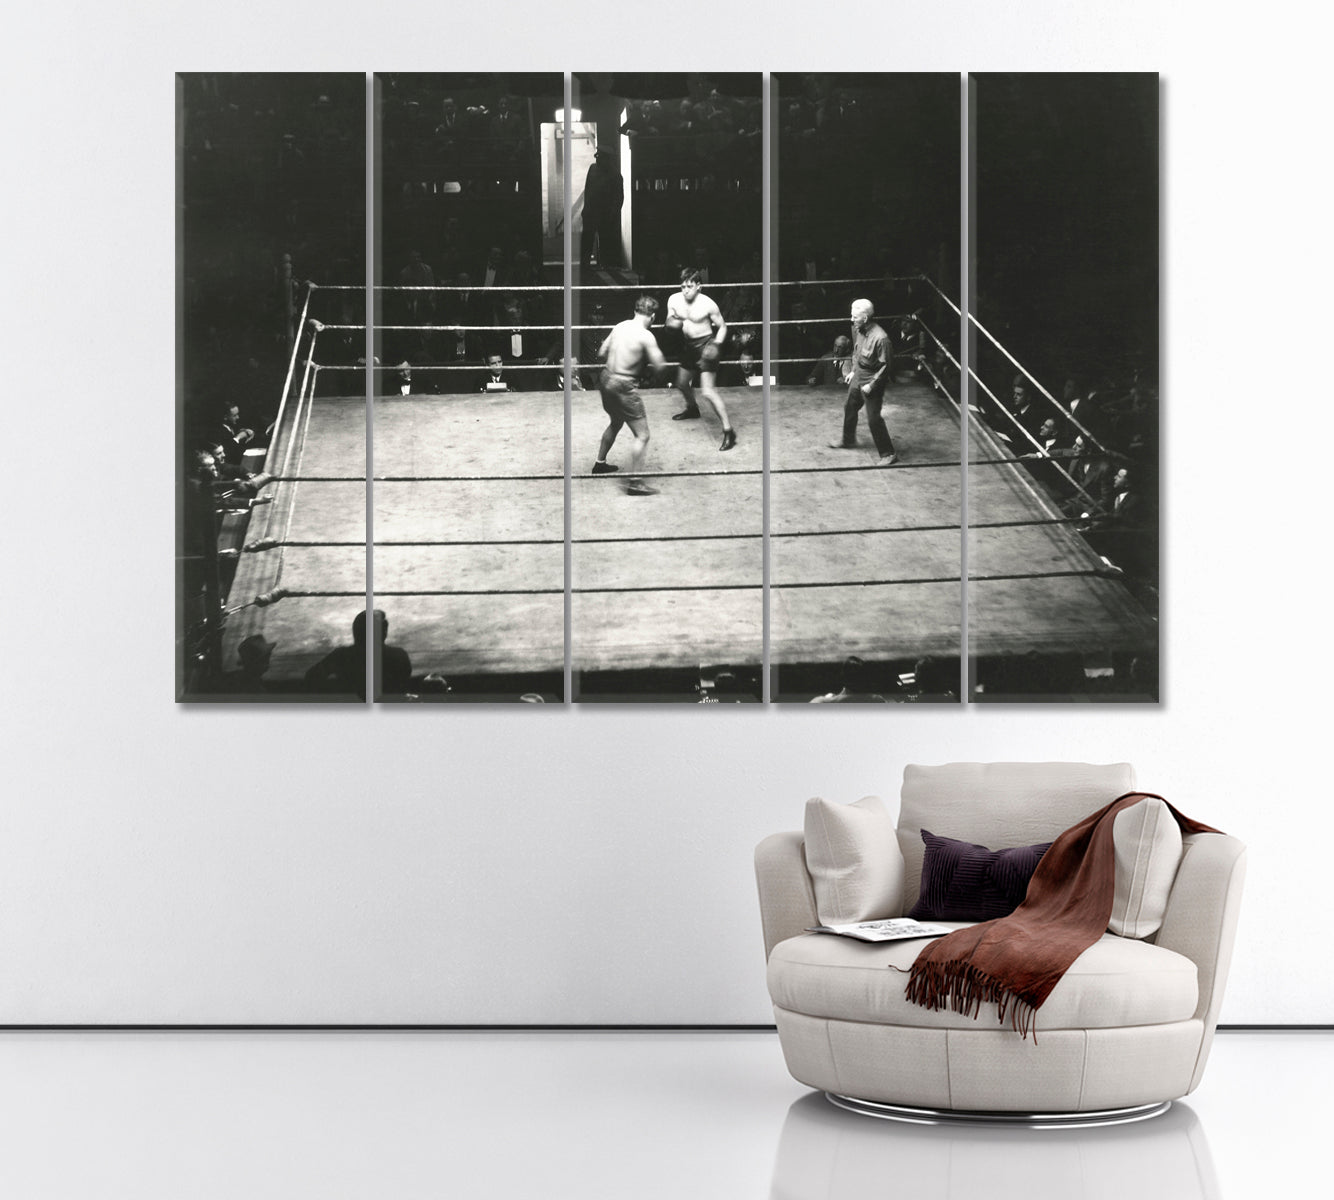 Retro Snapshot of Boxing Ring with Boxers Canvas Print ArtLexy 5 Panels 36"x24" inches 